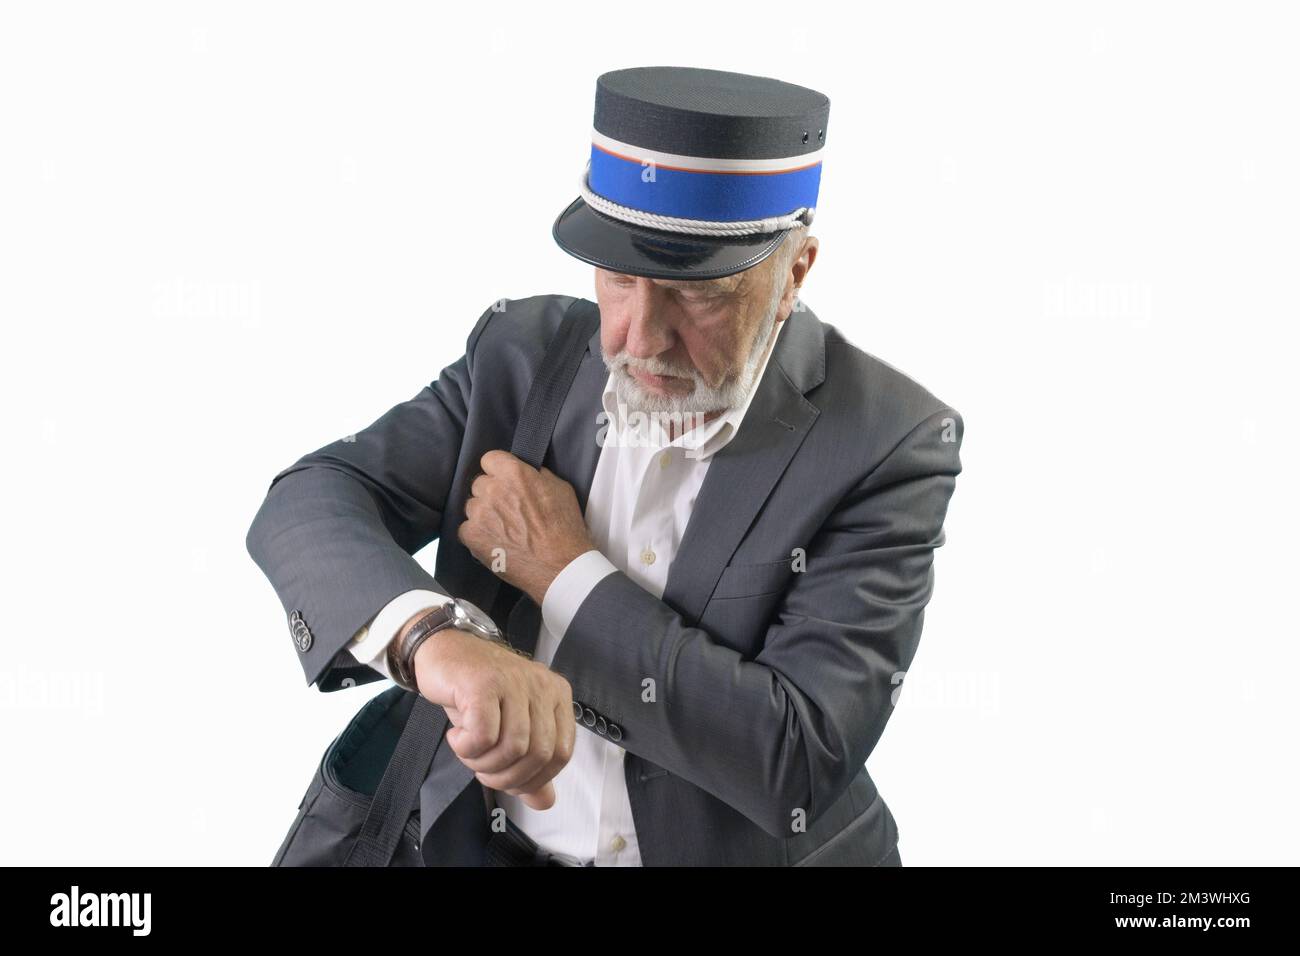 The train conductor looks at his wristwatch while waiting for the train to depart. Isolated. On a white background. Stock Photo